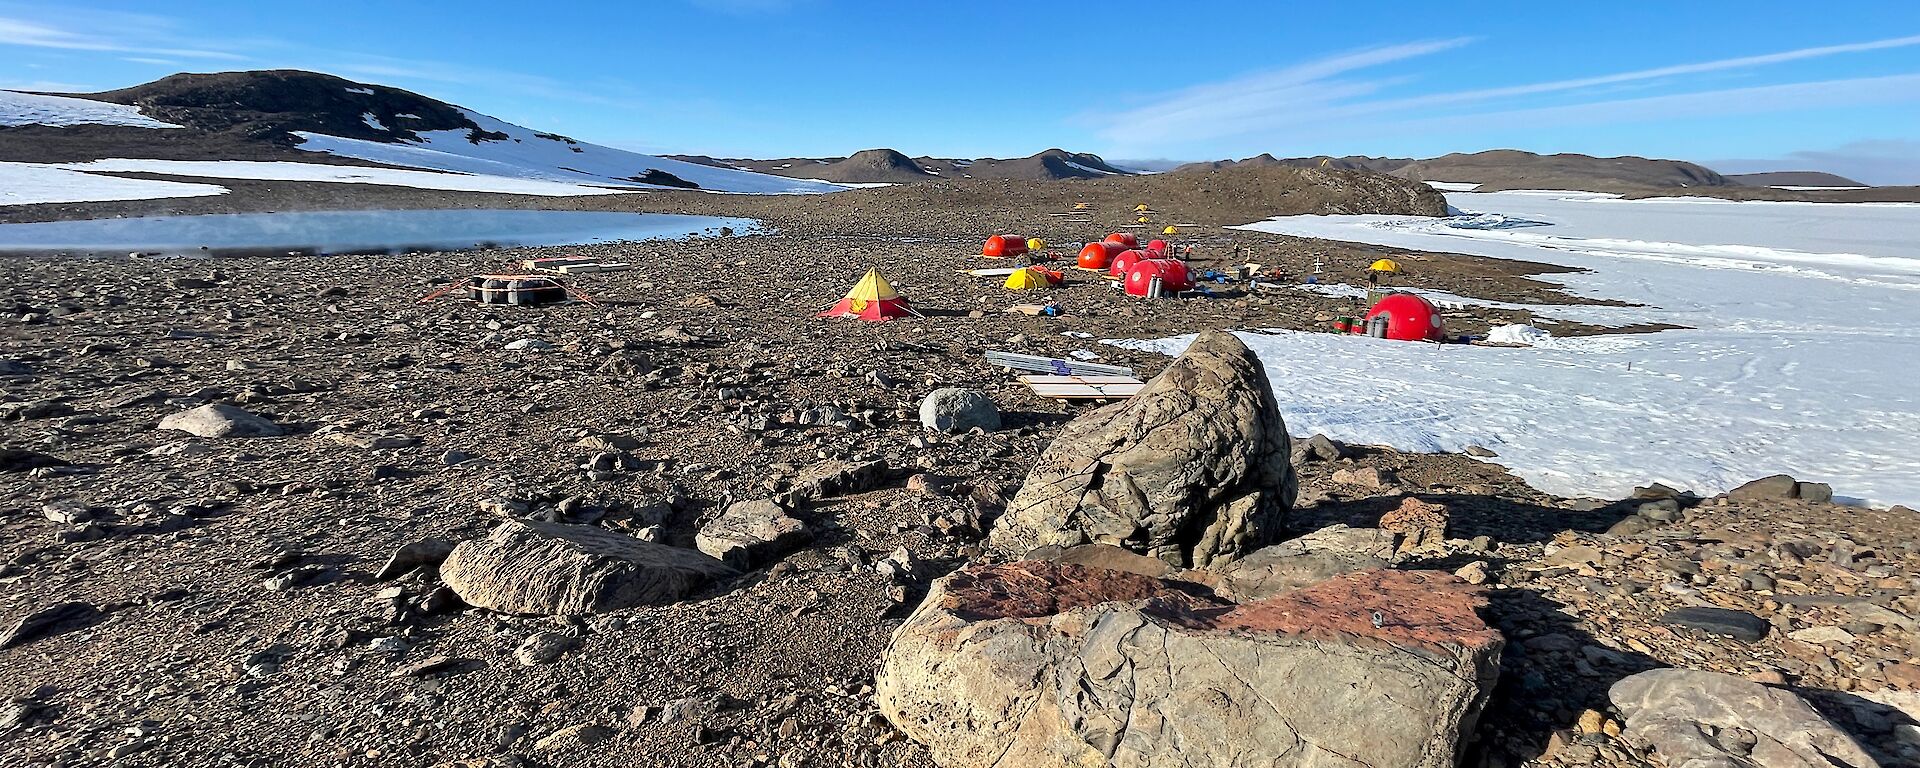 Tents set up among the rocks, surrounded by snow and blue skies